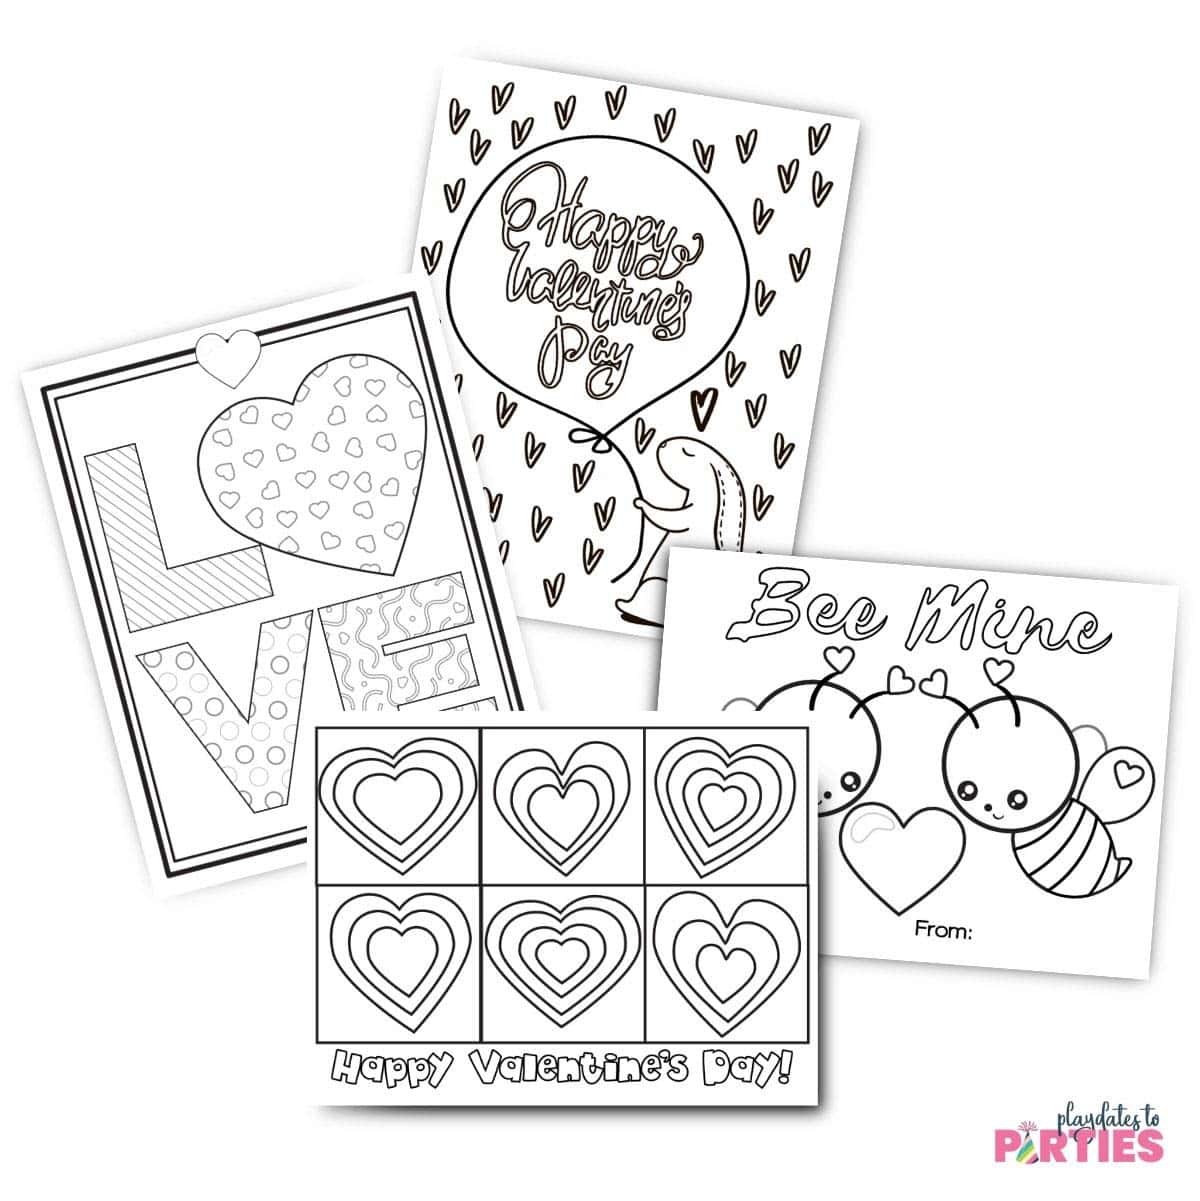 4 printable valentine coloring pages.